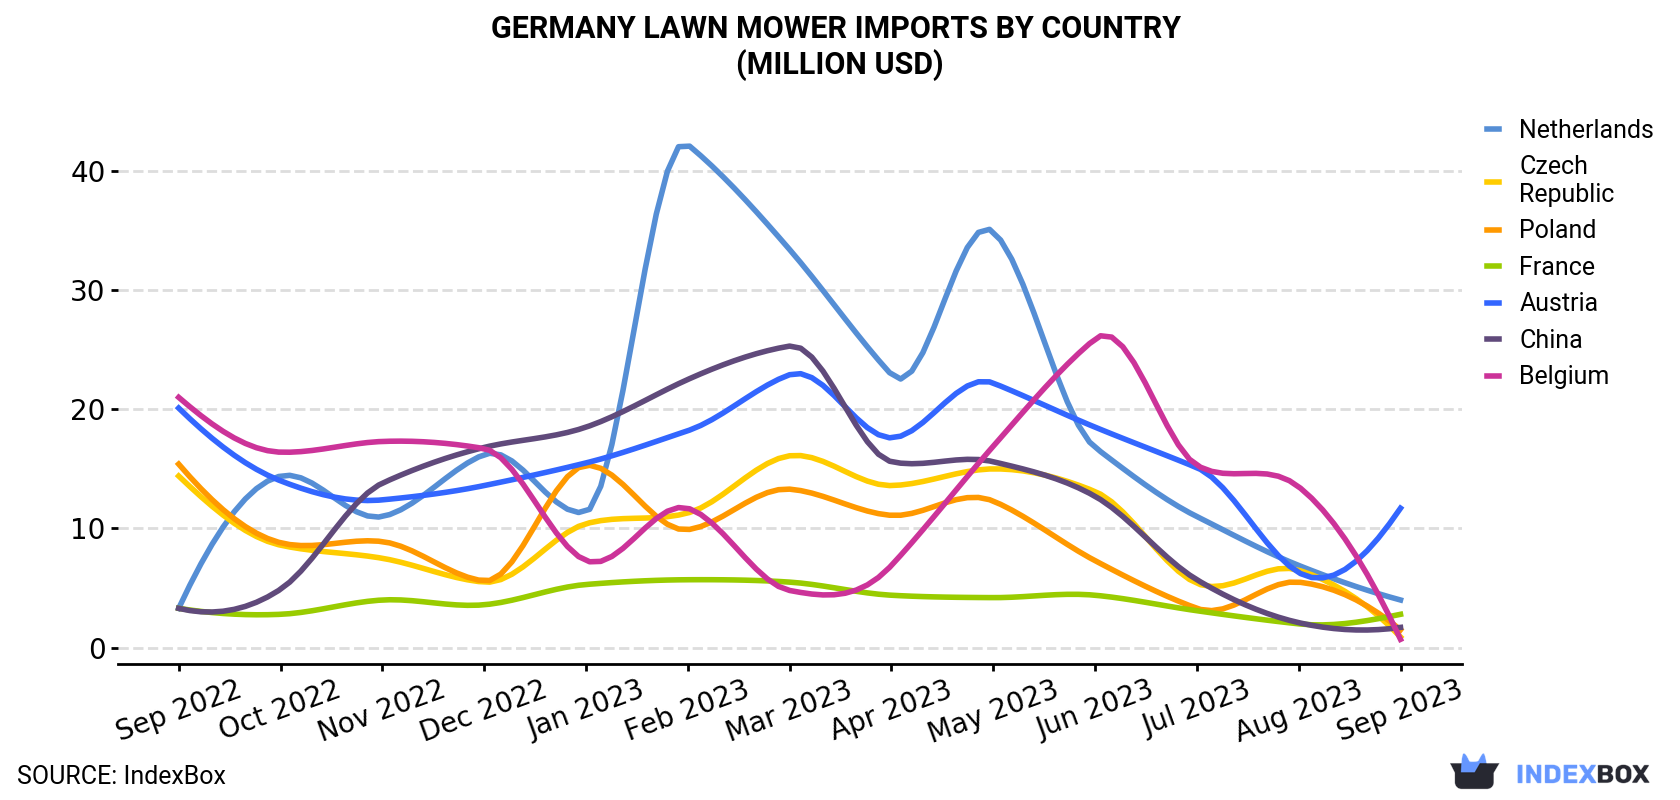 Germany Lawn Mower Imports By Country (Million USD)